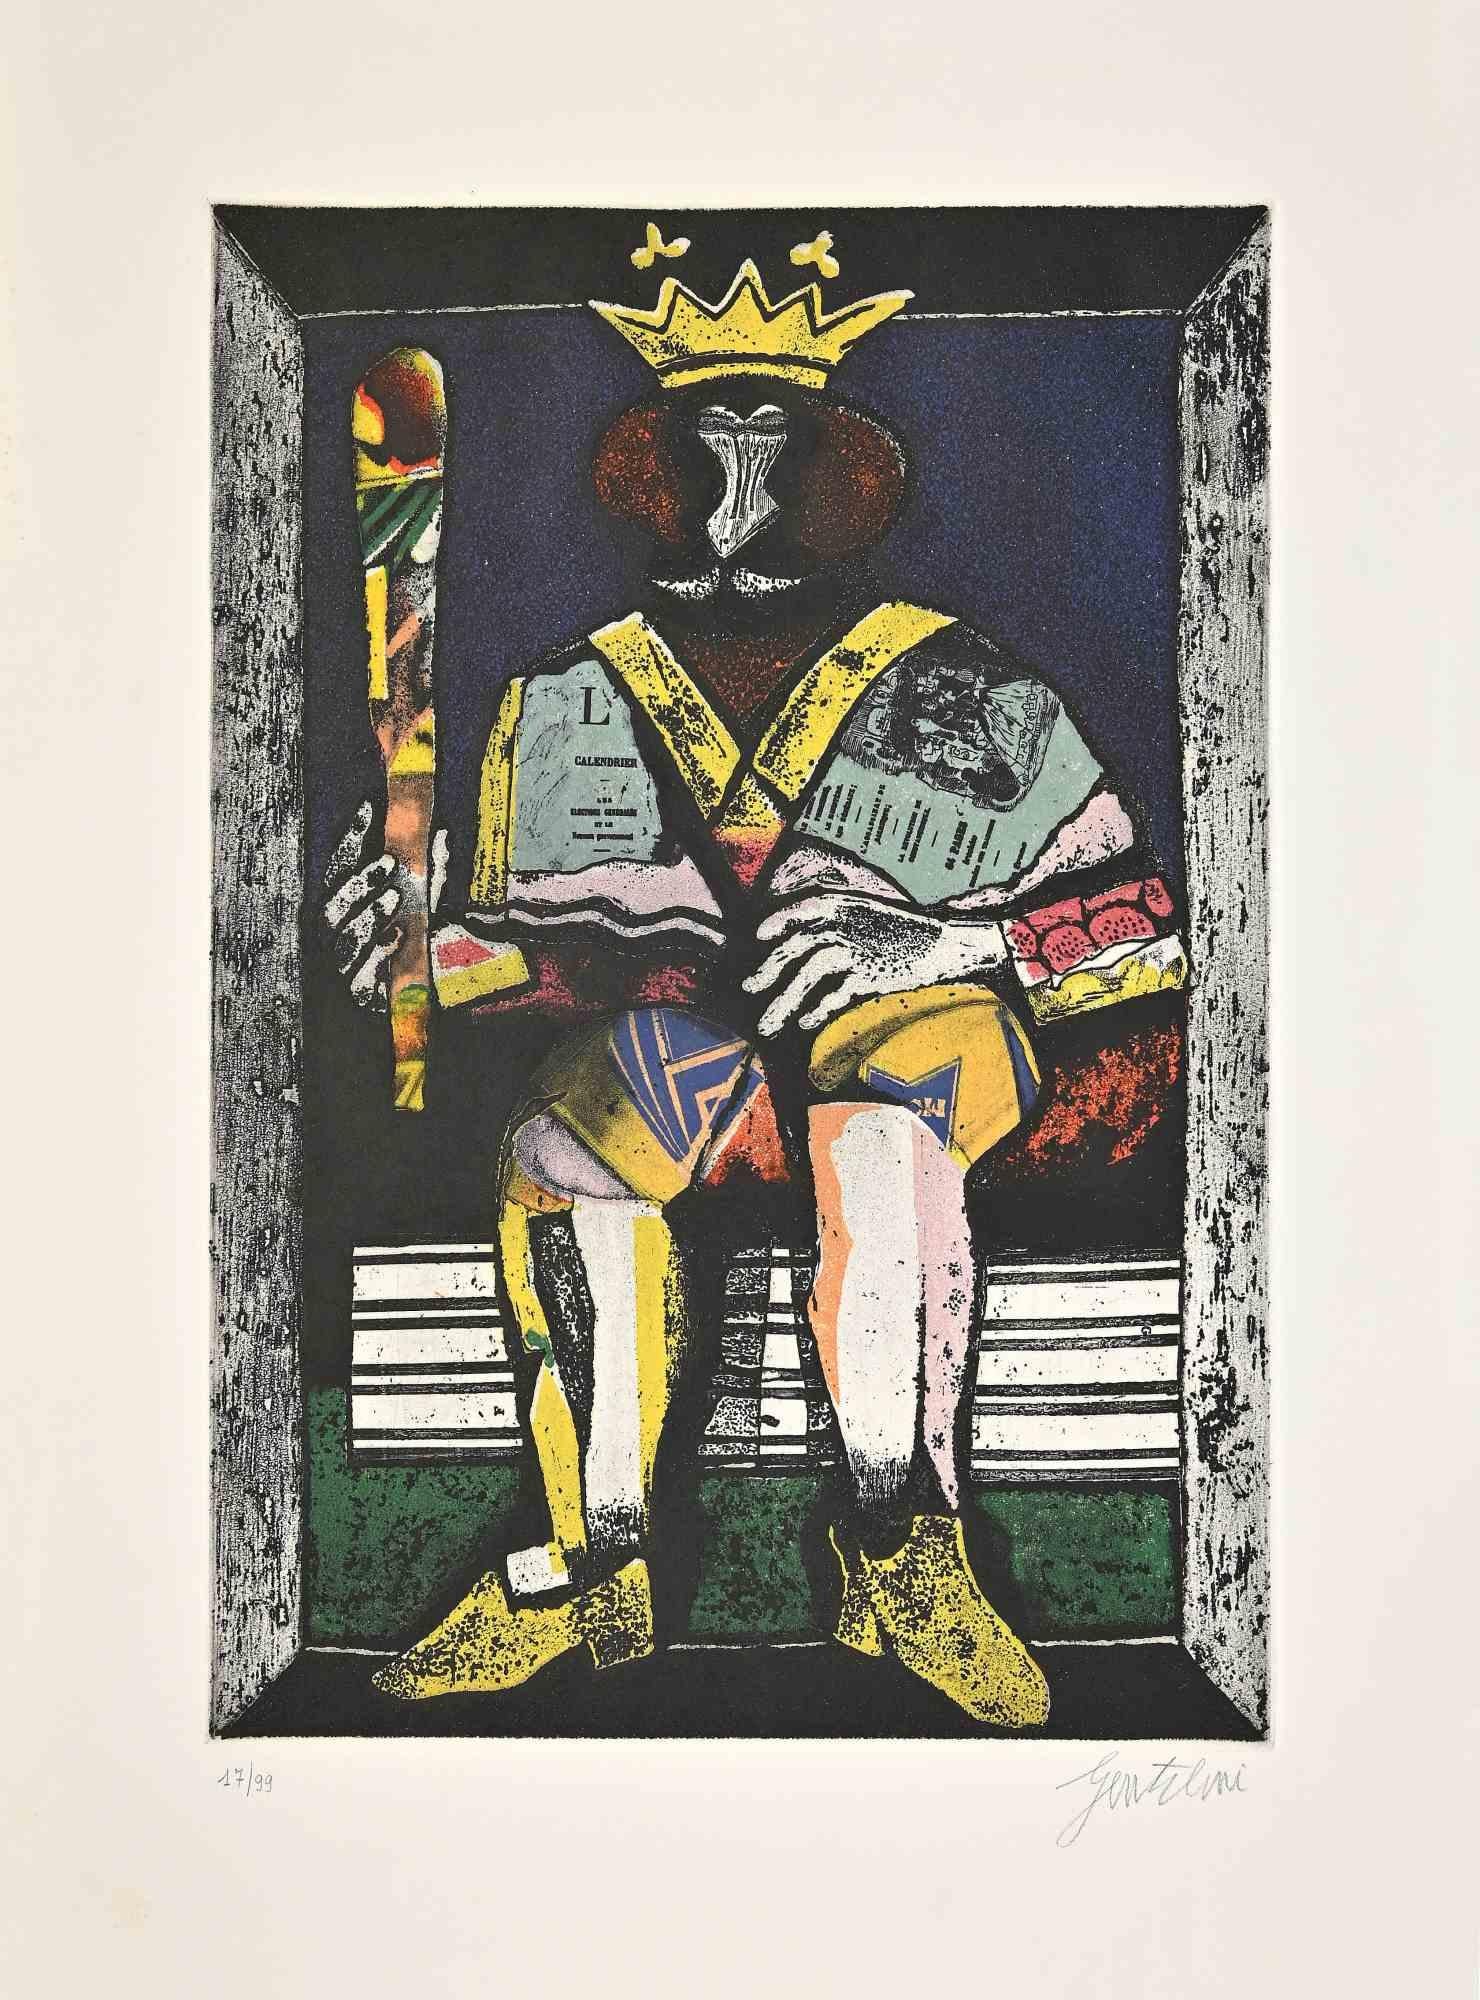 King of Wands is an etching realized by Franco Gentilini (Italian Painter, 1909-1981) in the 1970s.

The state of preservation of the artwork is very good.

Hand-signed.

Numbered, edition of 17/99.

Franco Gentilini (Italian Painter, 1909-1981):